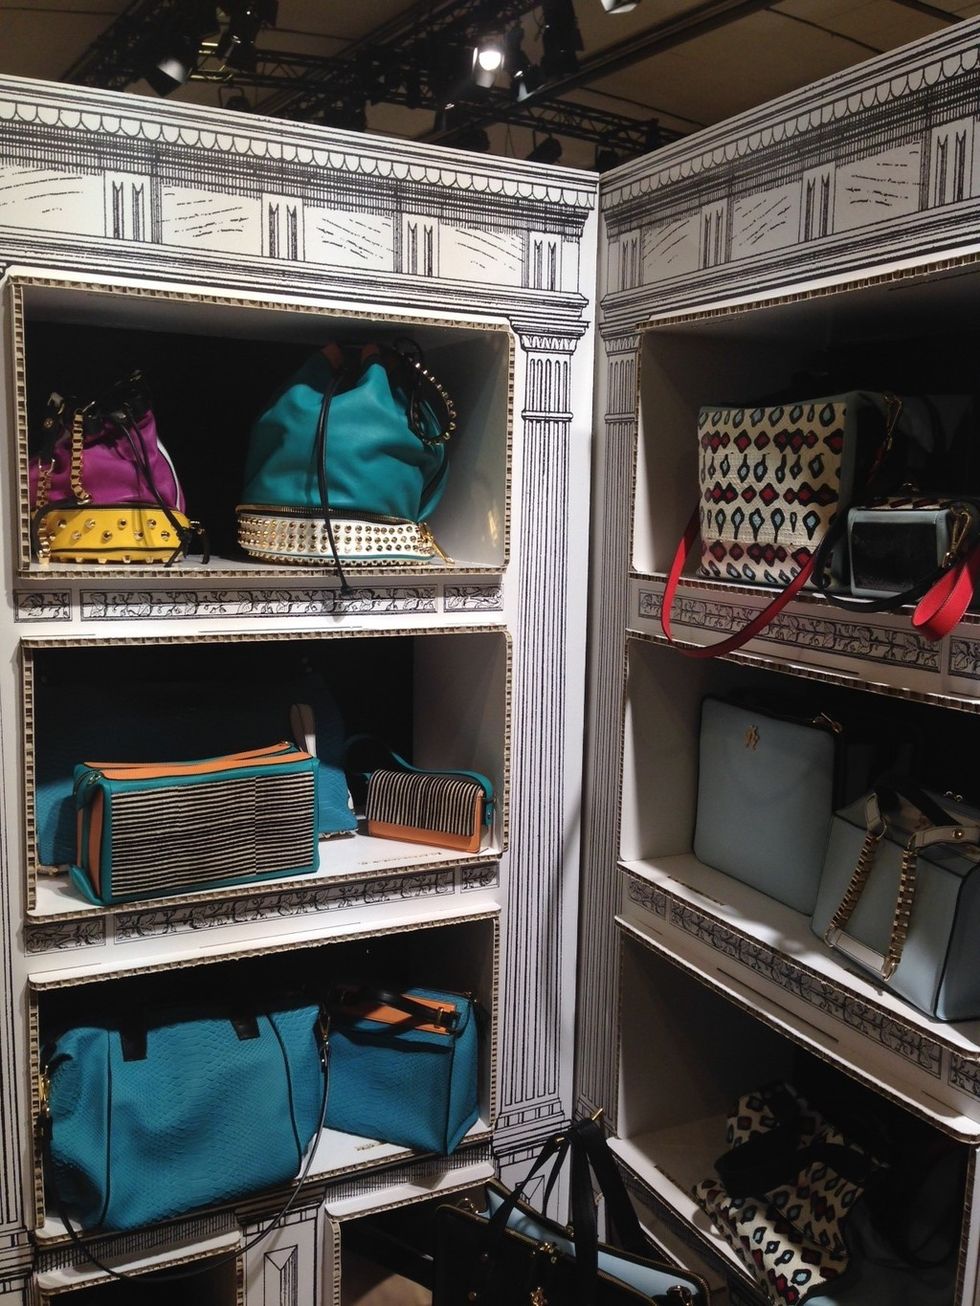 Shelf, Shelving, Teal, Closet, Turquoise, Linens, Collection, 